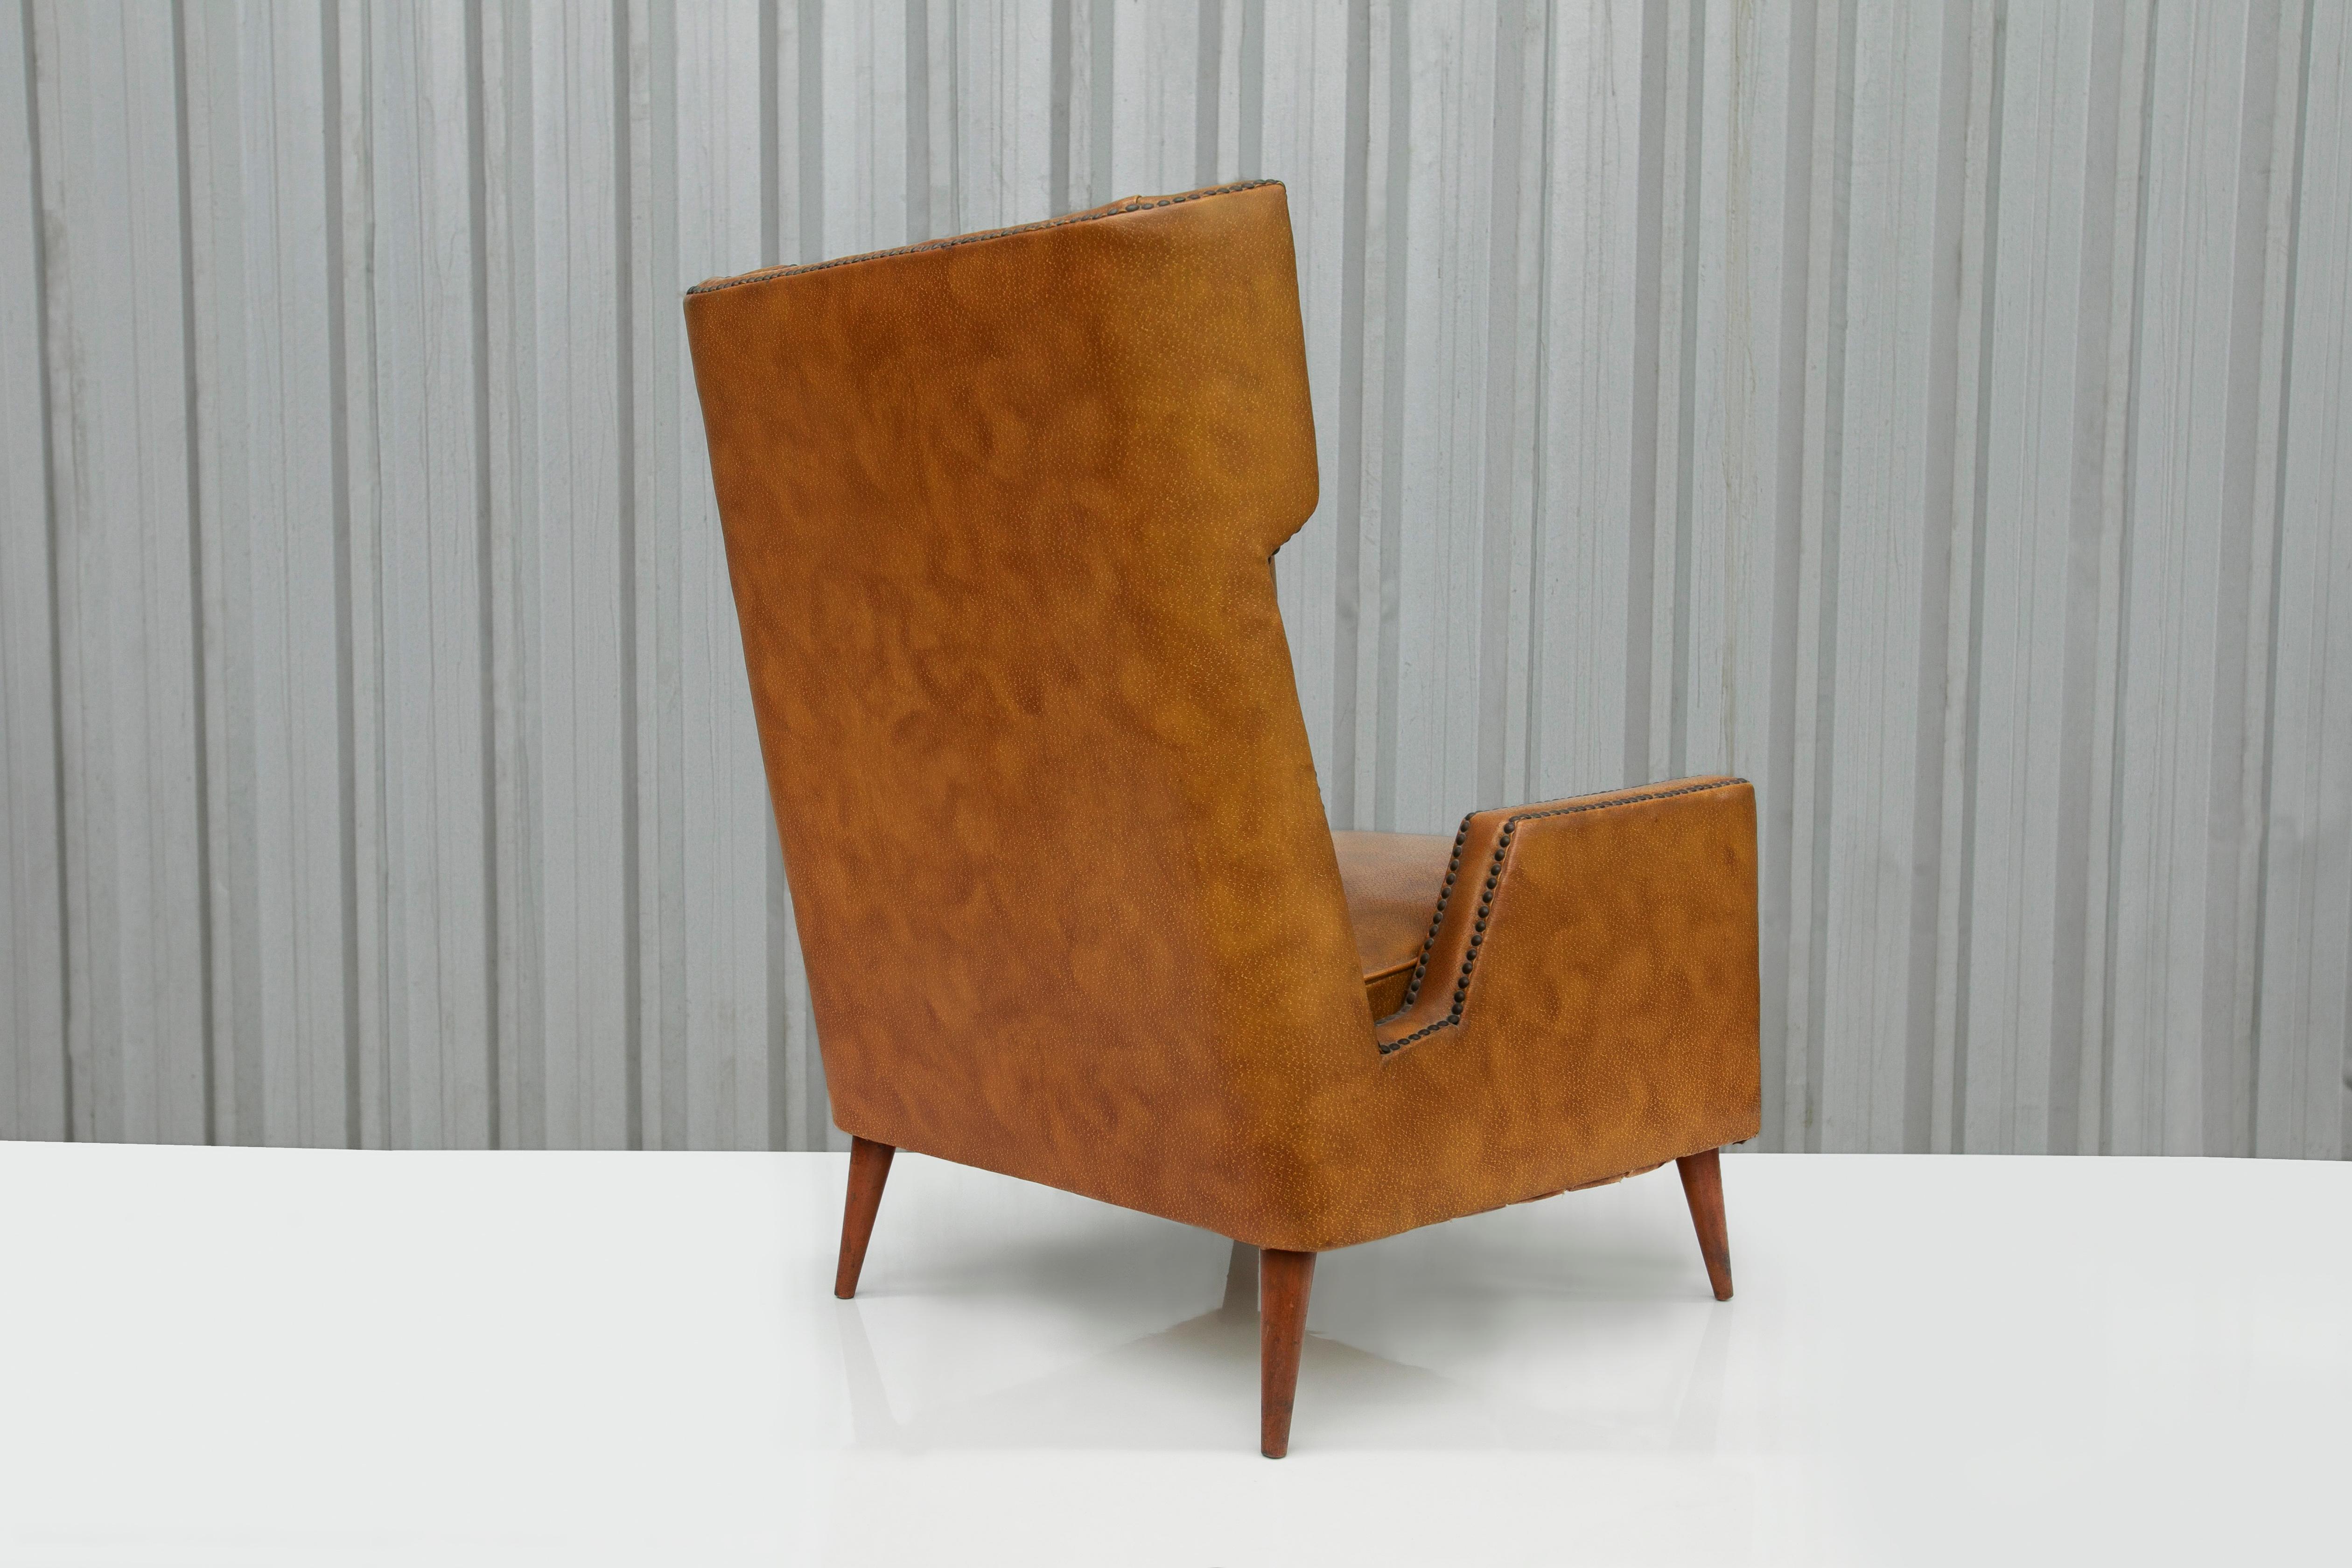 Brazilian Modern Armchair in Hardwood, Brown Leatherette, G. Scapinelli, 1950s In Good Condition For Sale In New York, NY